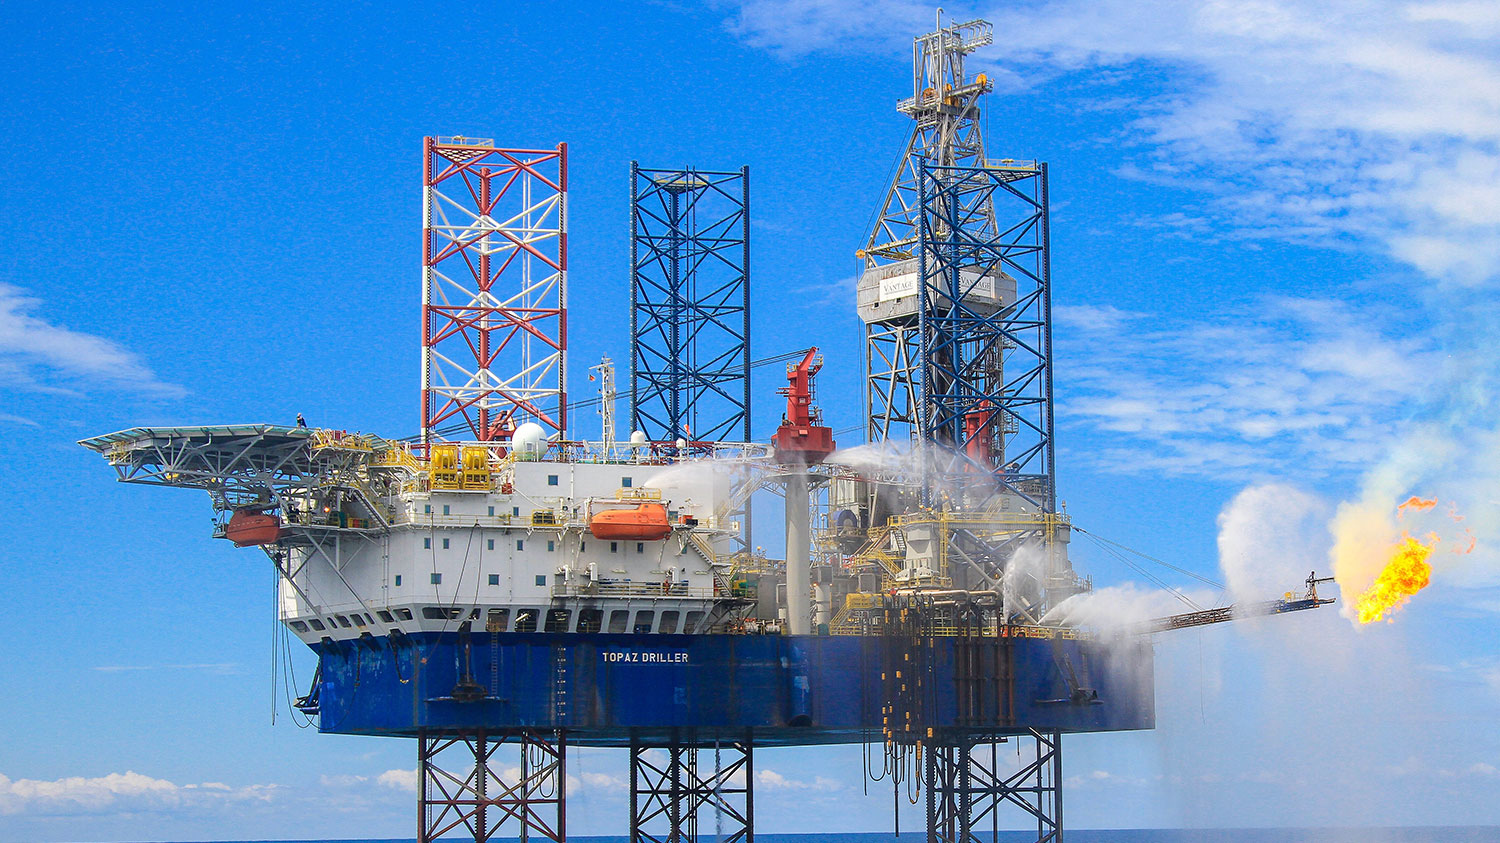 Rig which conducted the IE-4 well test; Source: New Age